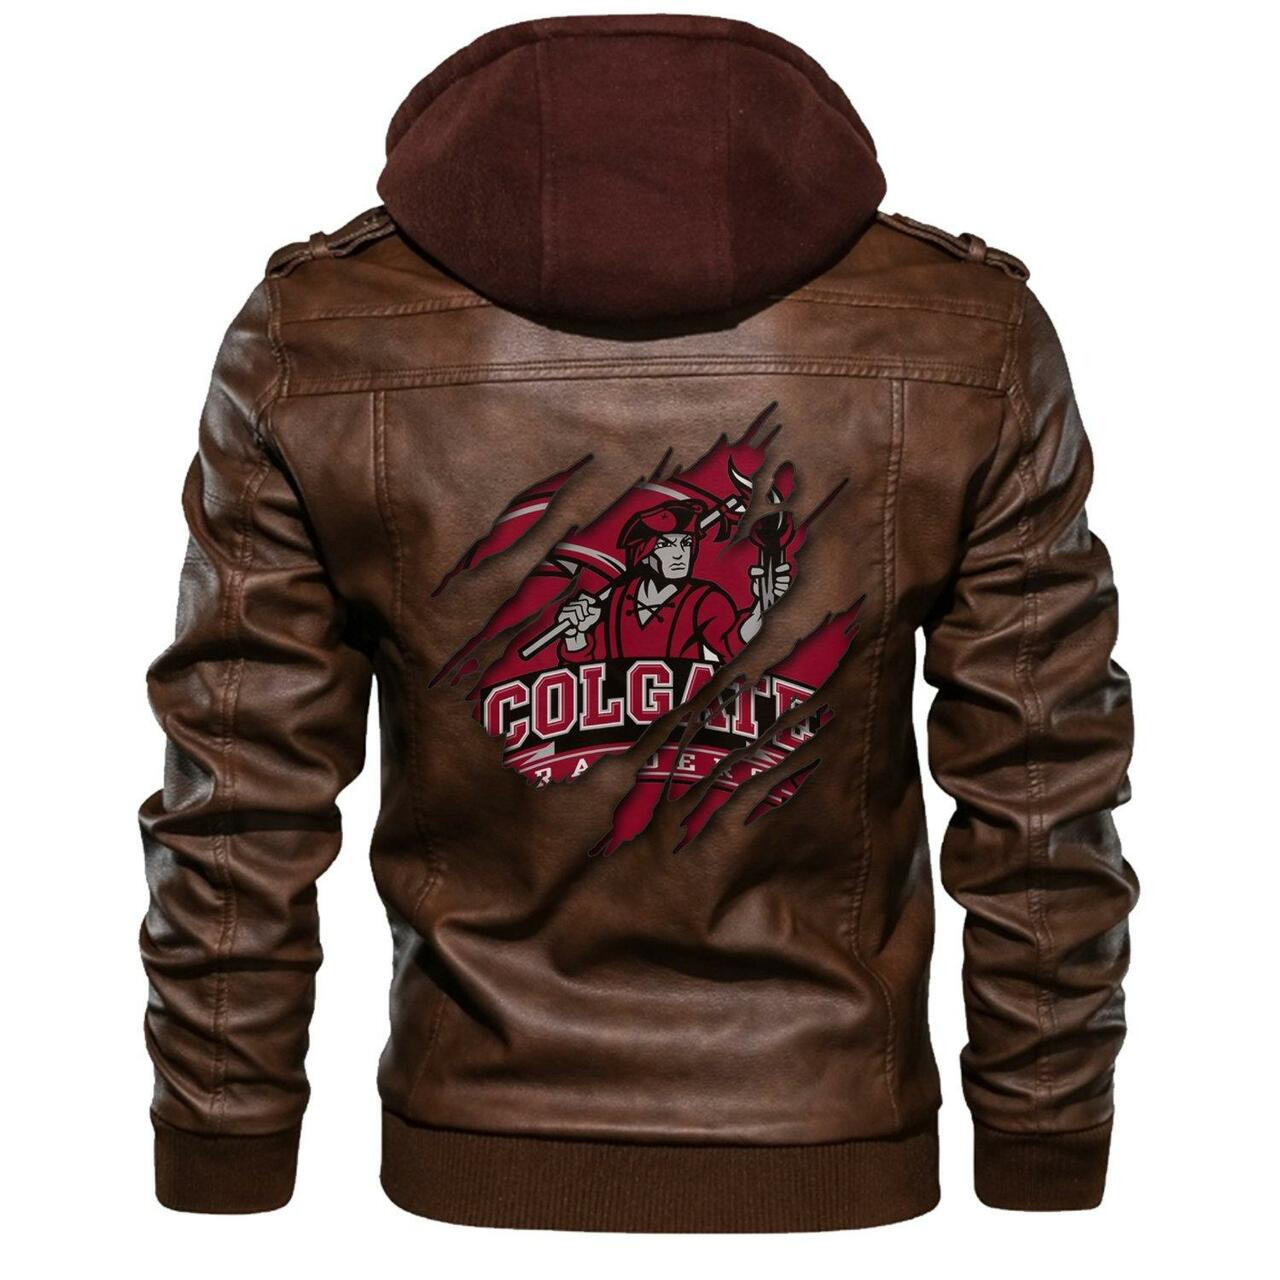 Top 200+ leather jacket so cool for your man 213